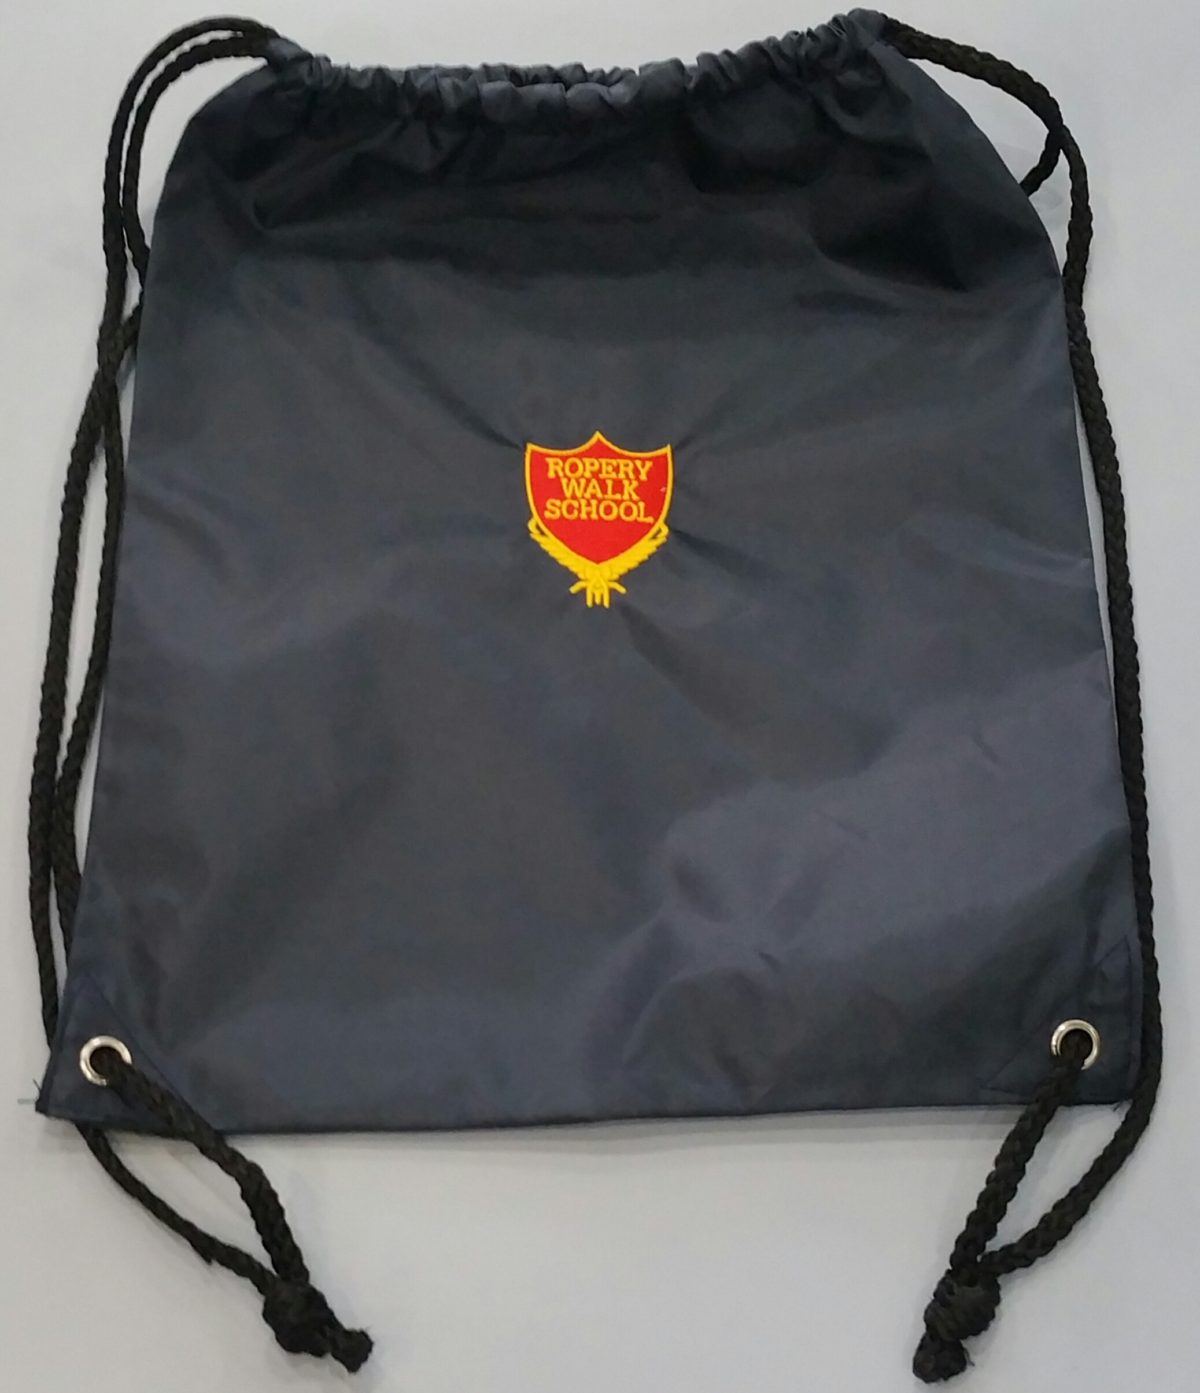 NAVY BLUE P.E. KIT BAG with embroidered school logo